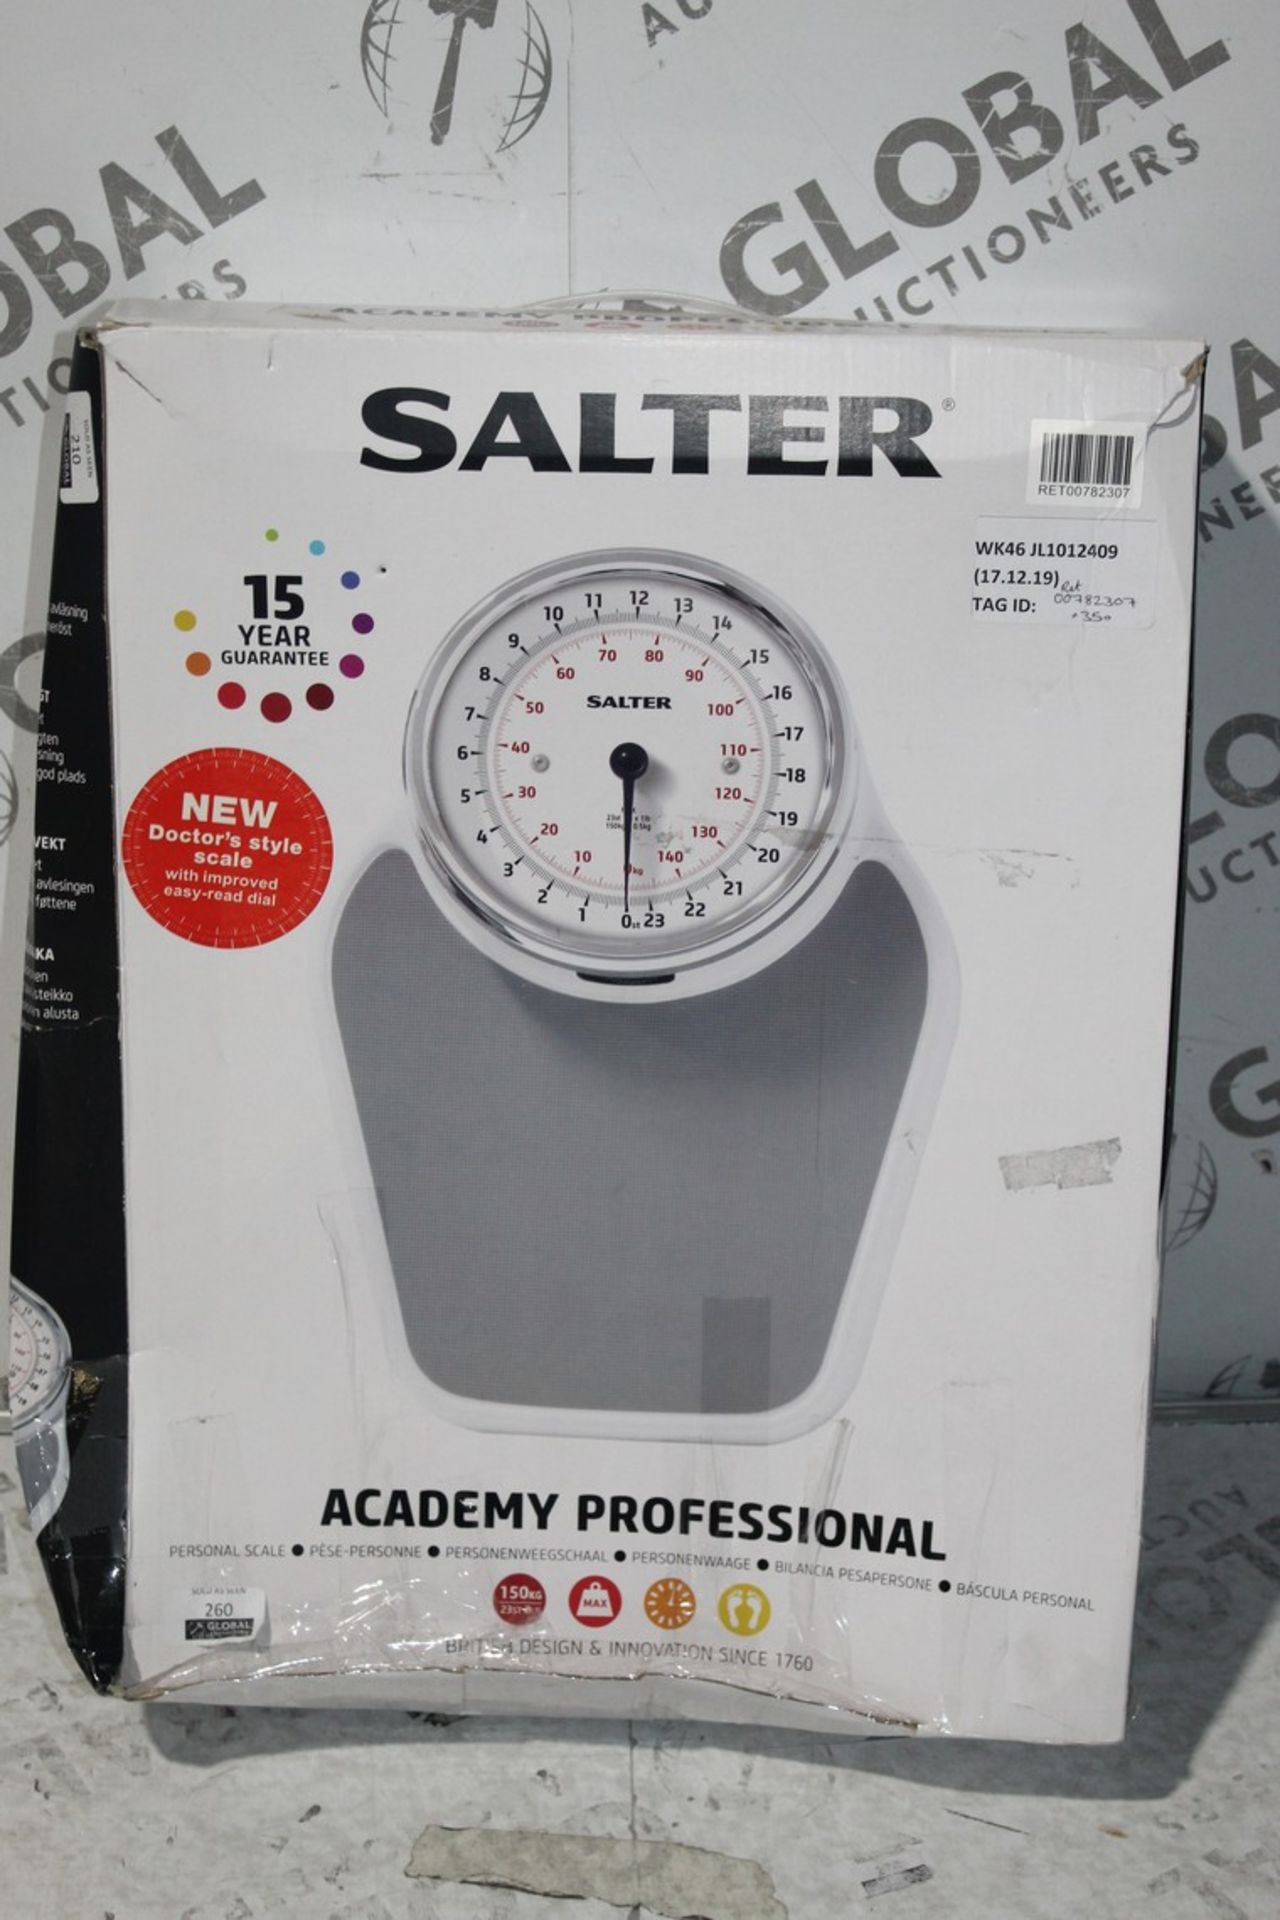 Boxed Pairs of Salter Academy Professional Mechanical Weighing Scales RRP £35 Each (RET00782307)(